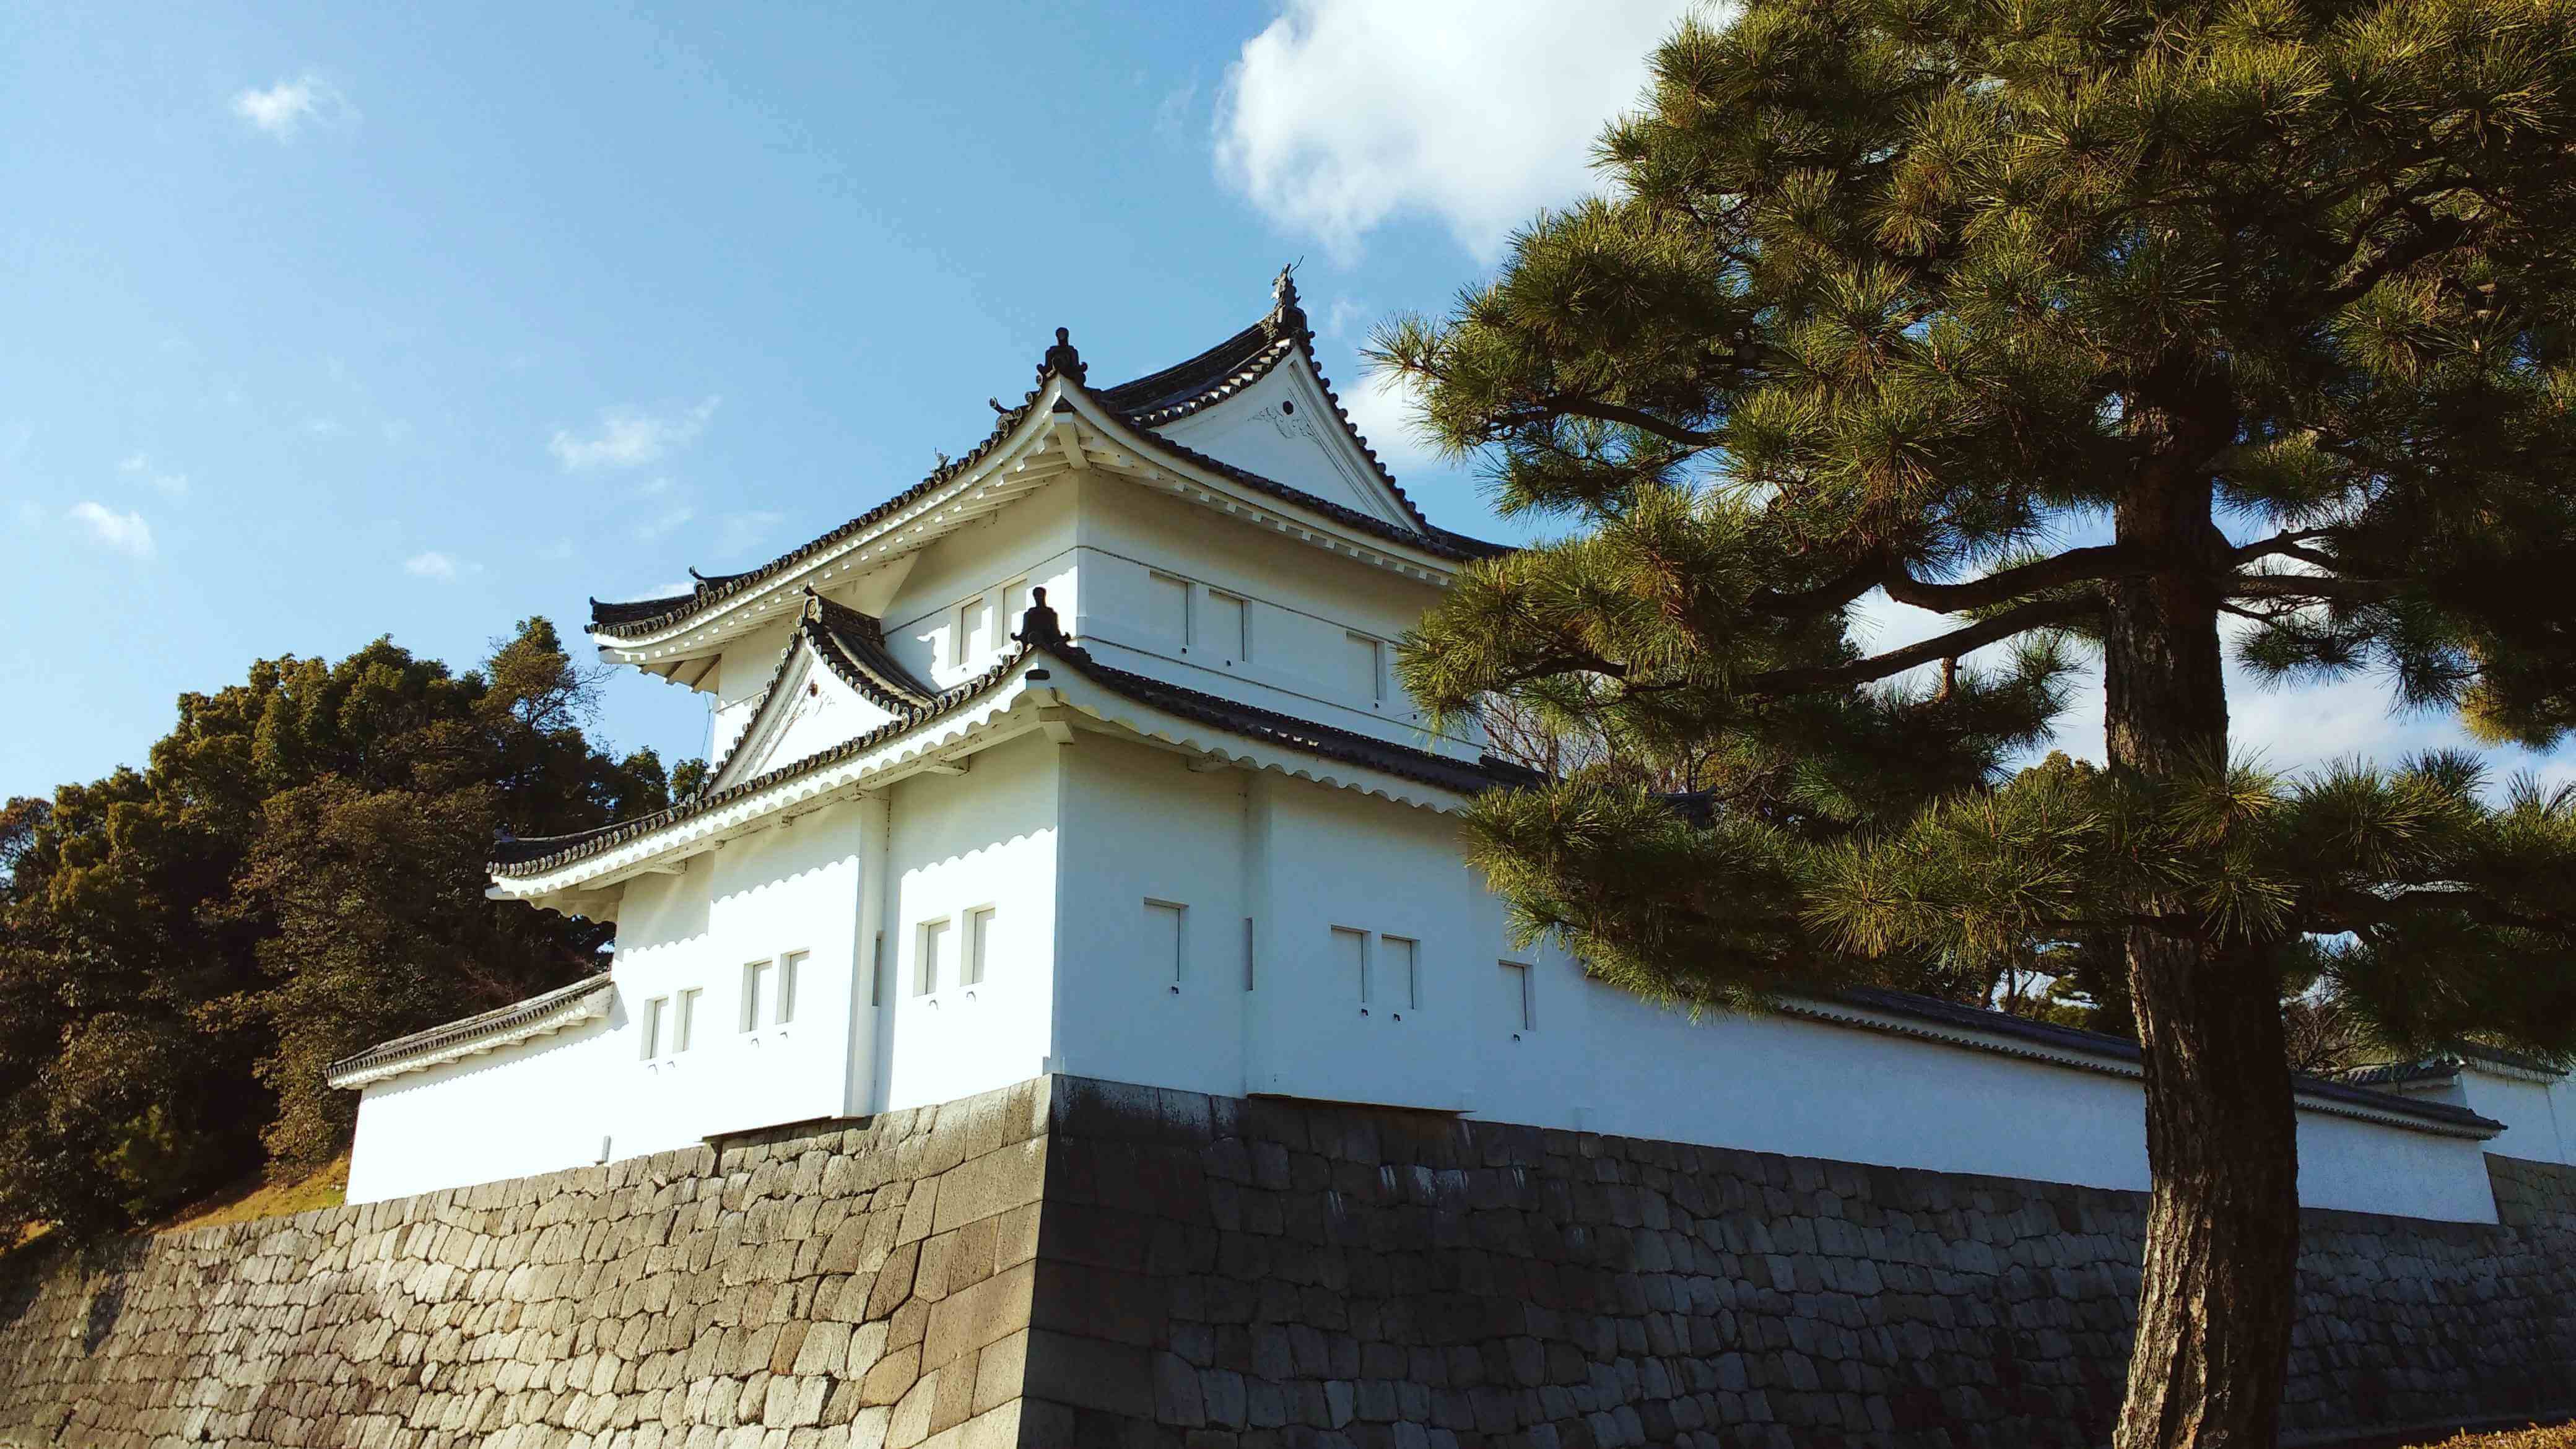 The outer walls of a white Japanese castle